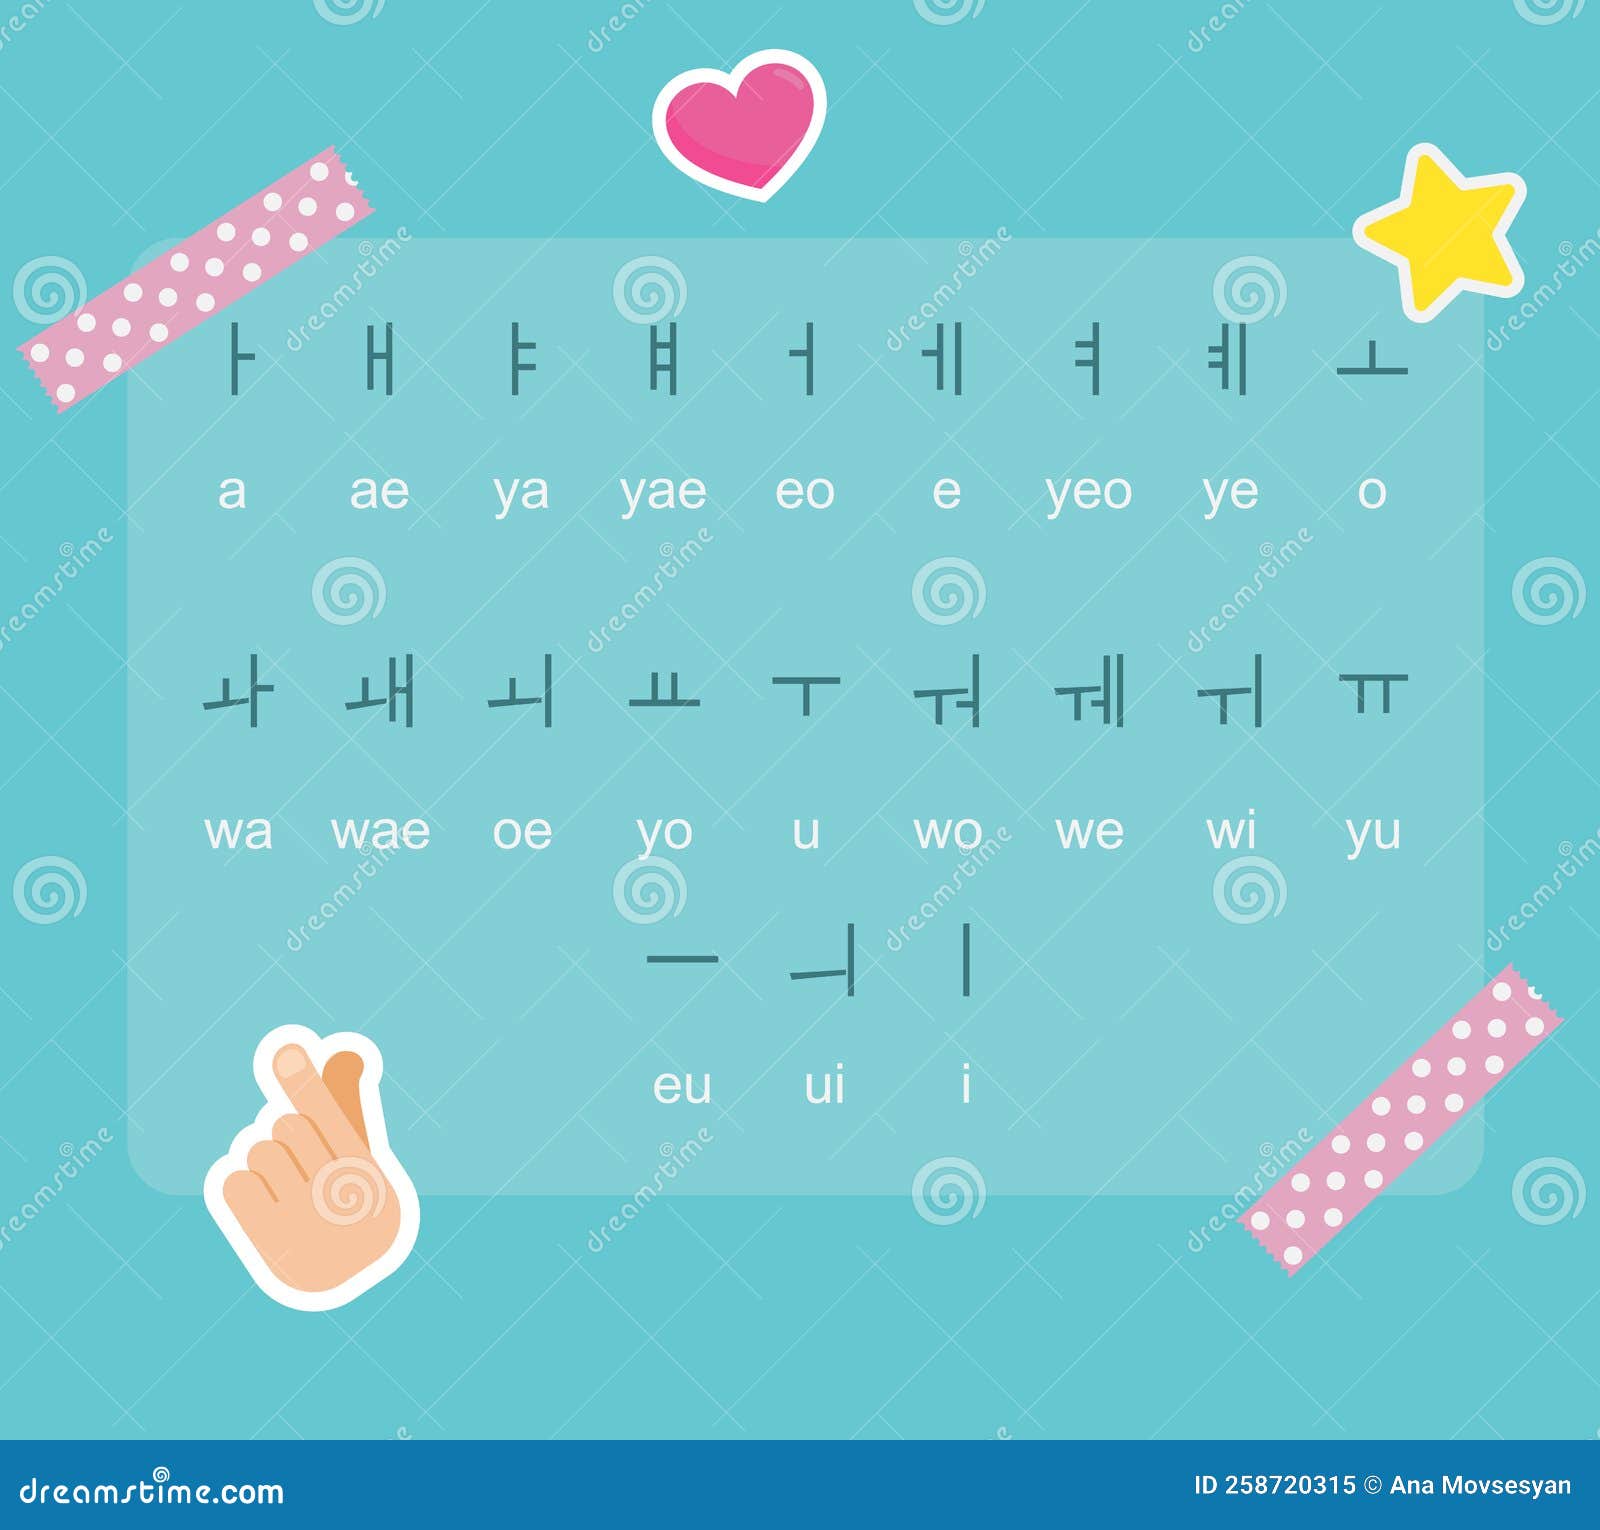 korean vowels and their pronunciation with stickers and tape